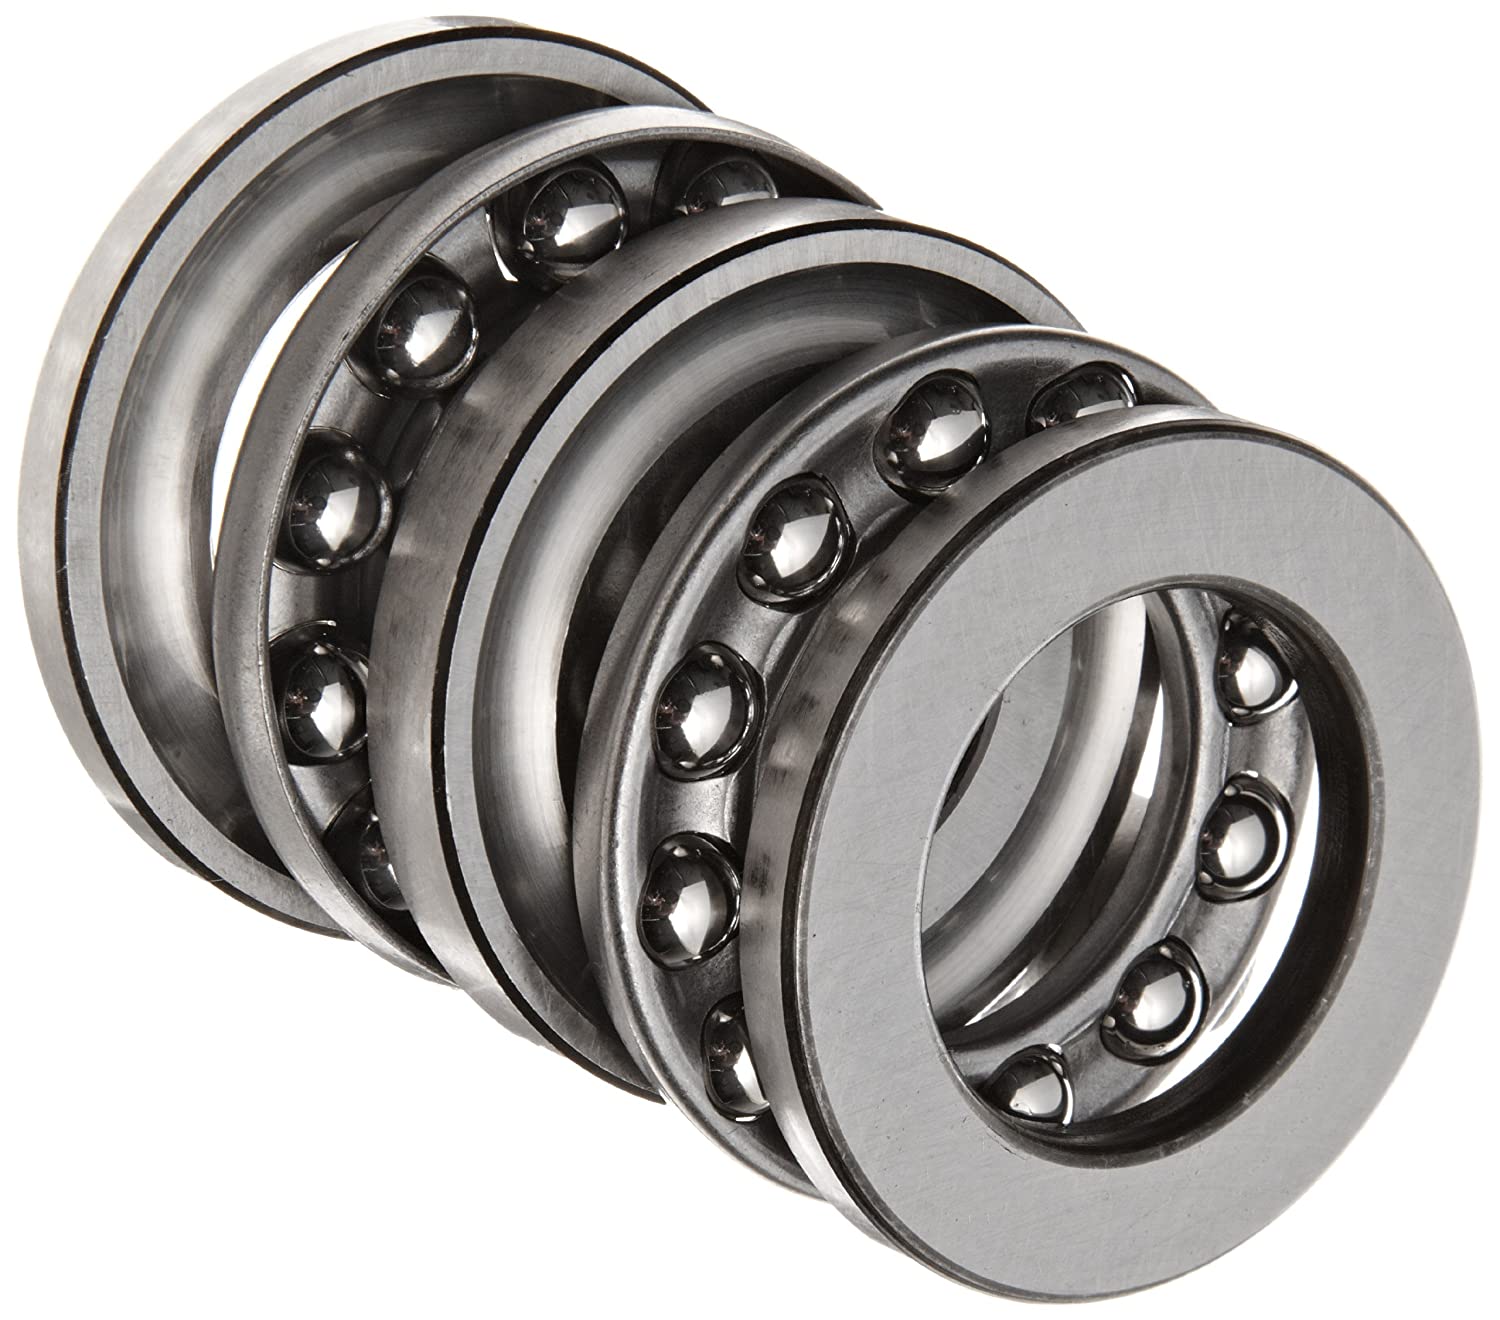 HRB Chrome Steel Low Price High Quality 51315 8315 Thrust Ball Bearing